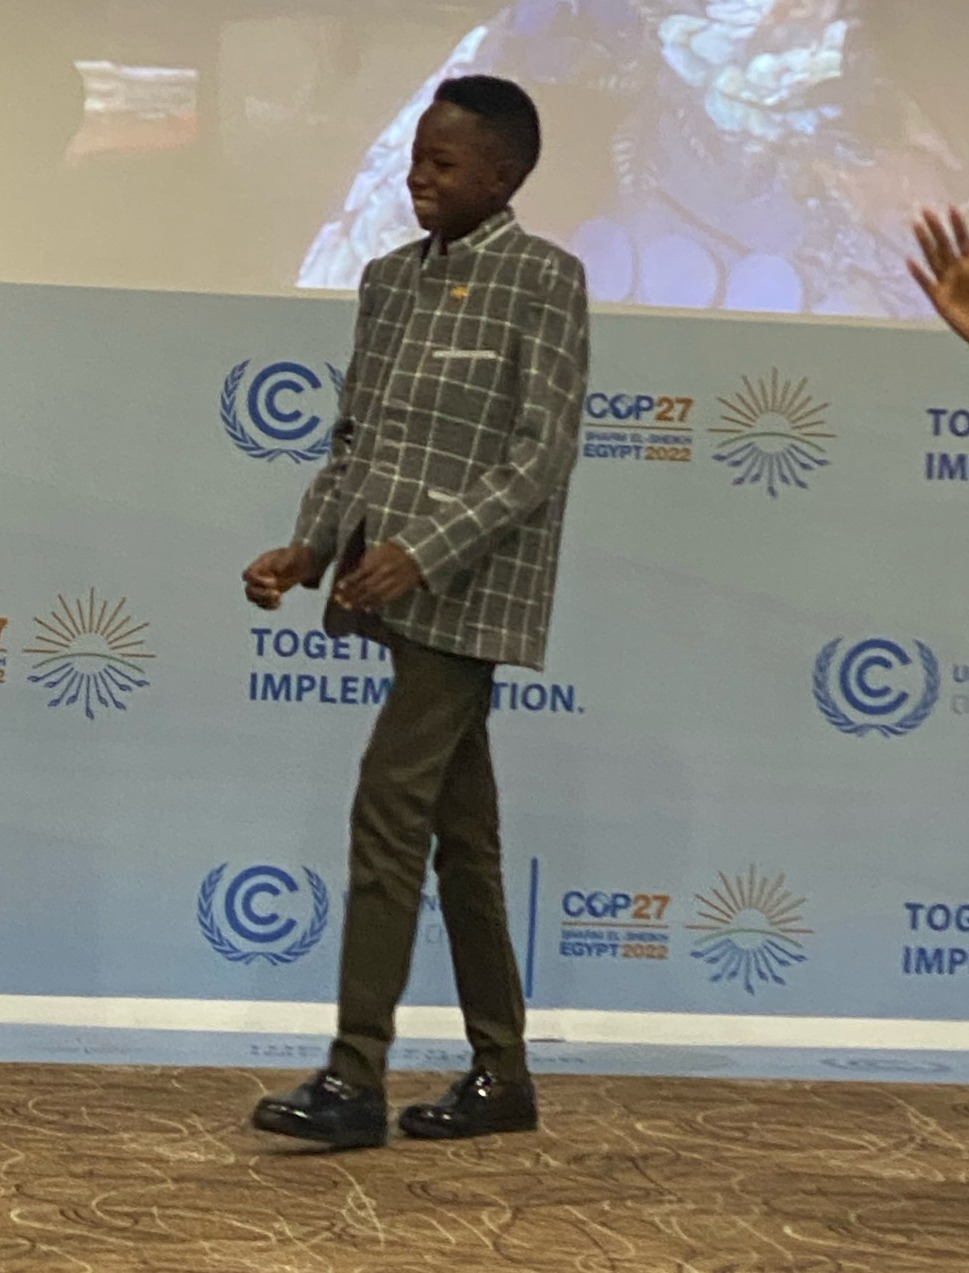 Picture: the child Asaad at the climate summit in Sharm el Sheikh on his way to tell how he fled from Sudan to Egypt after the floods destroyed his home. Mohammed Mansour via Facebook.